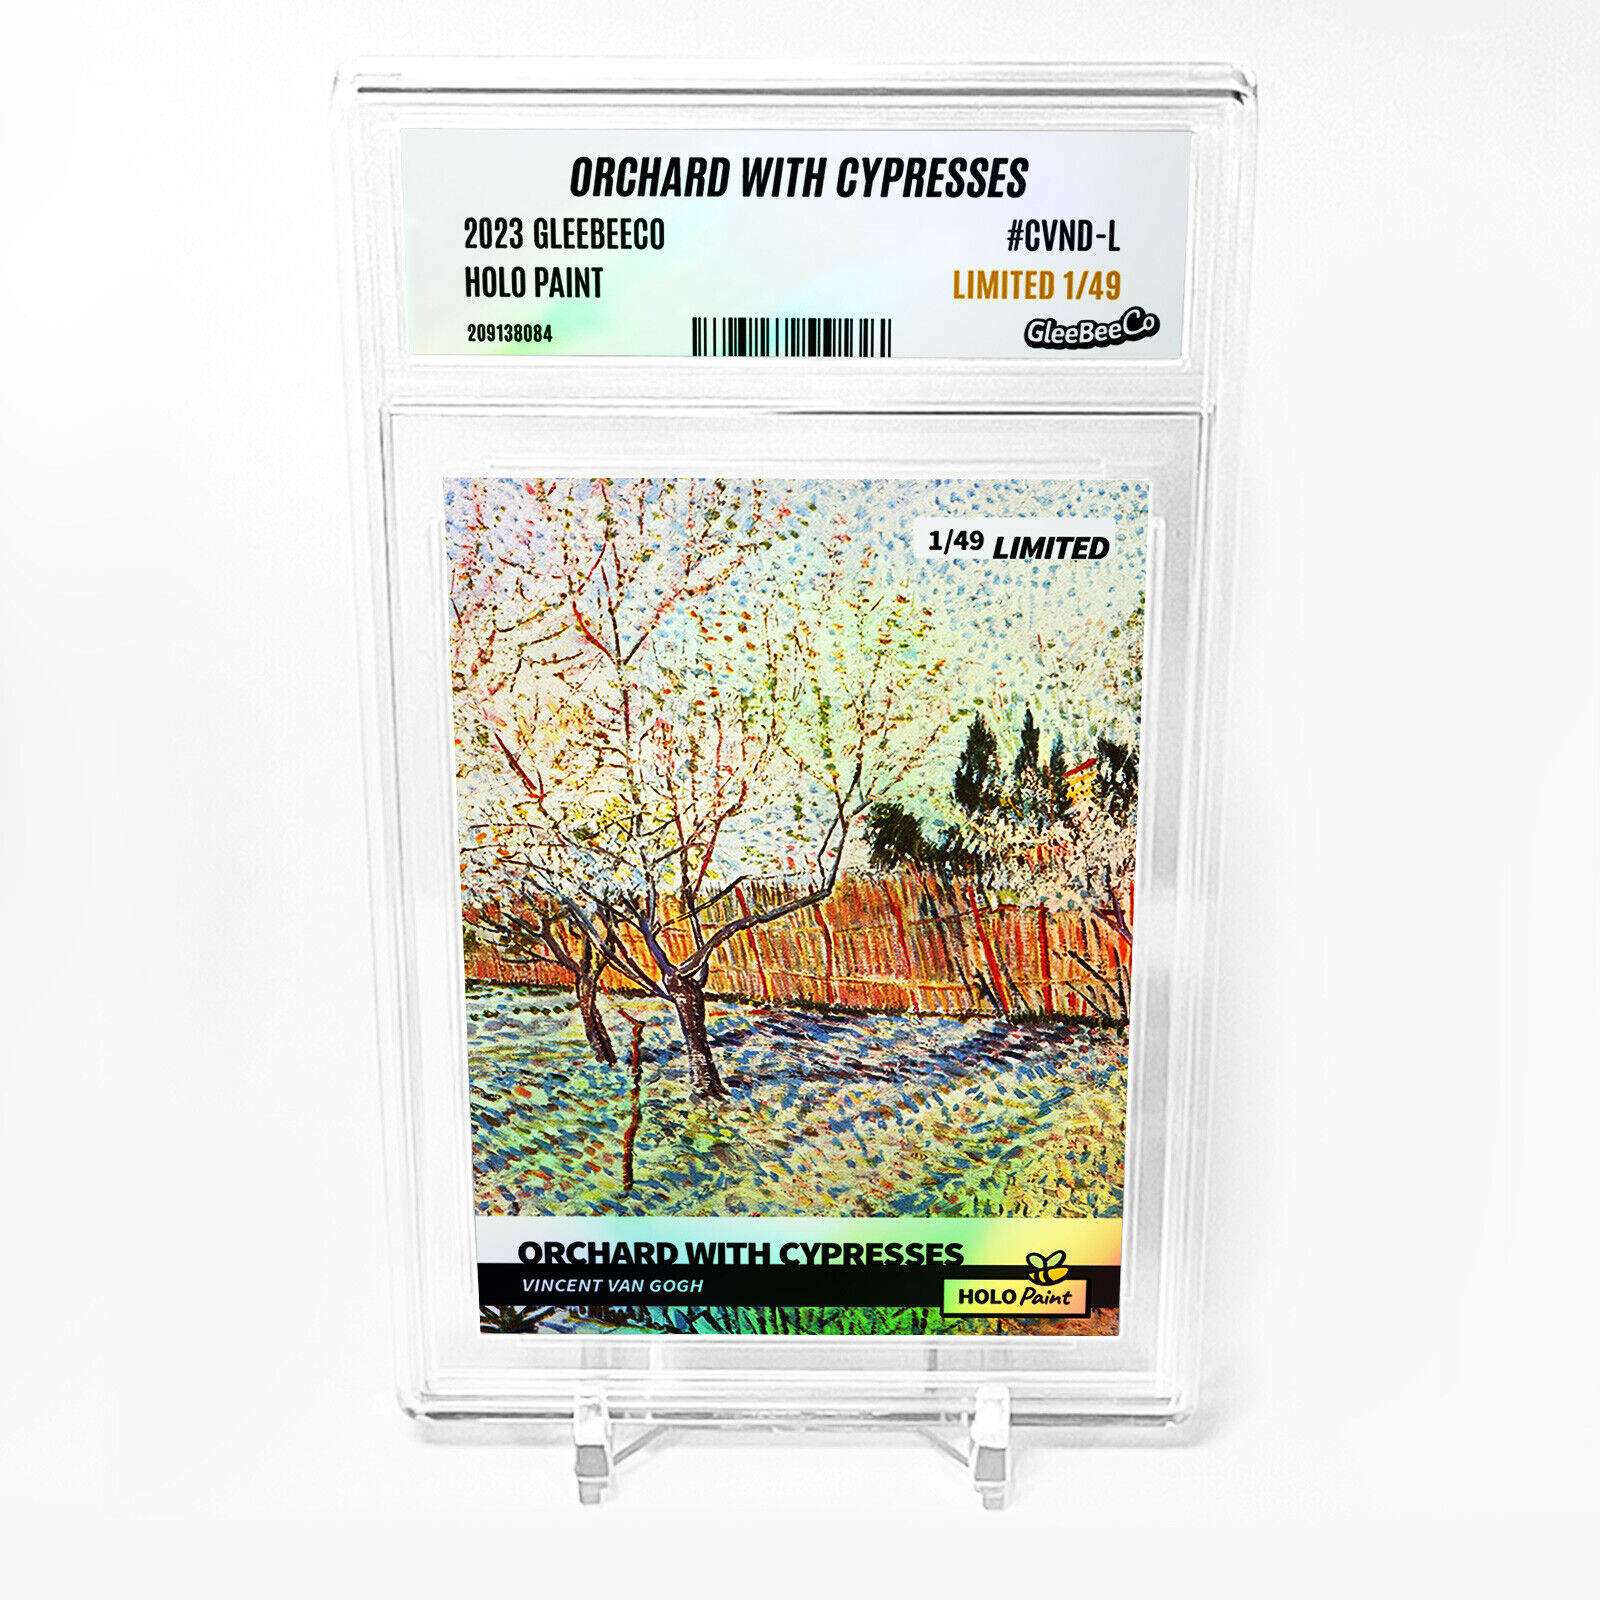 ORCHARD WITH CYPRESSES Card 2023 GleeBeeCo Holo Paint #CVND-L Limited to /49